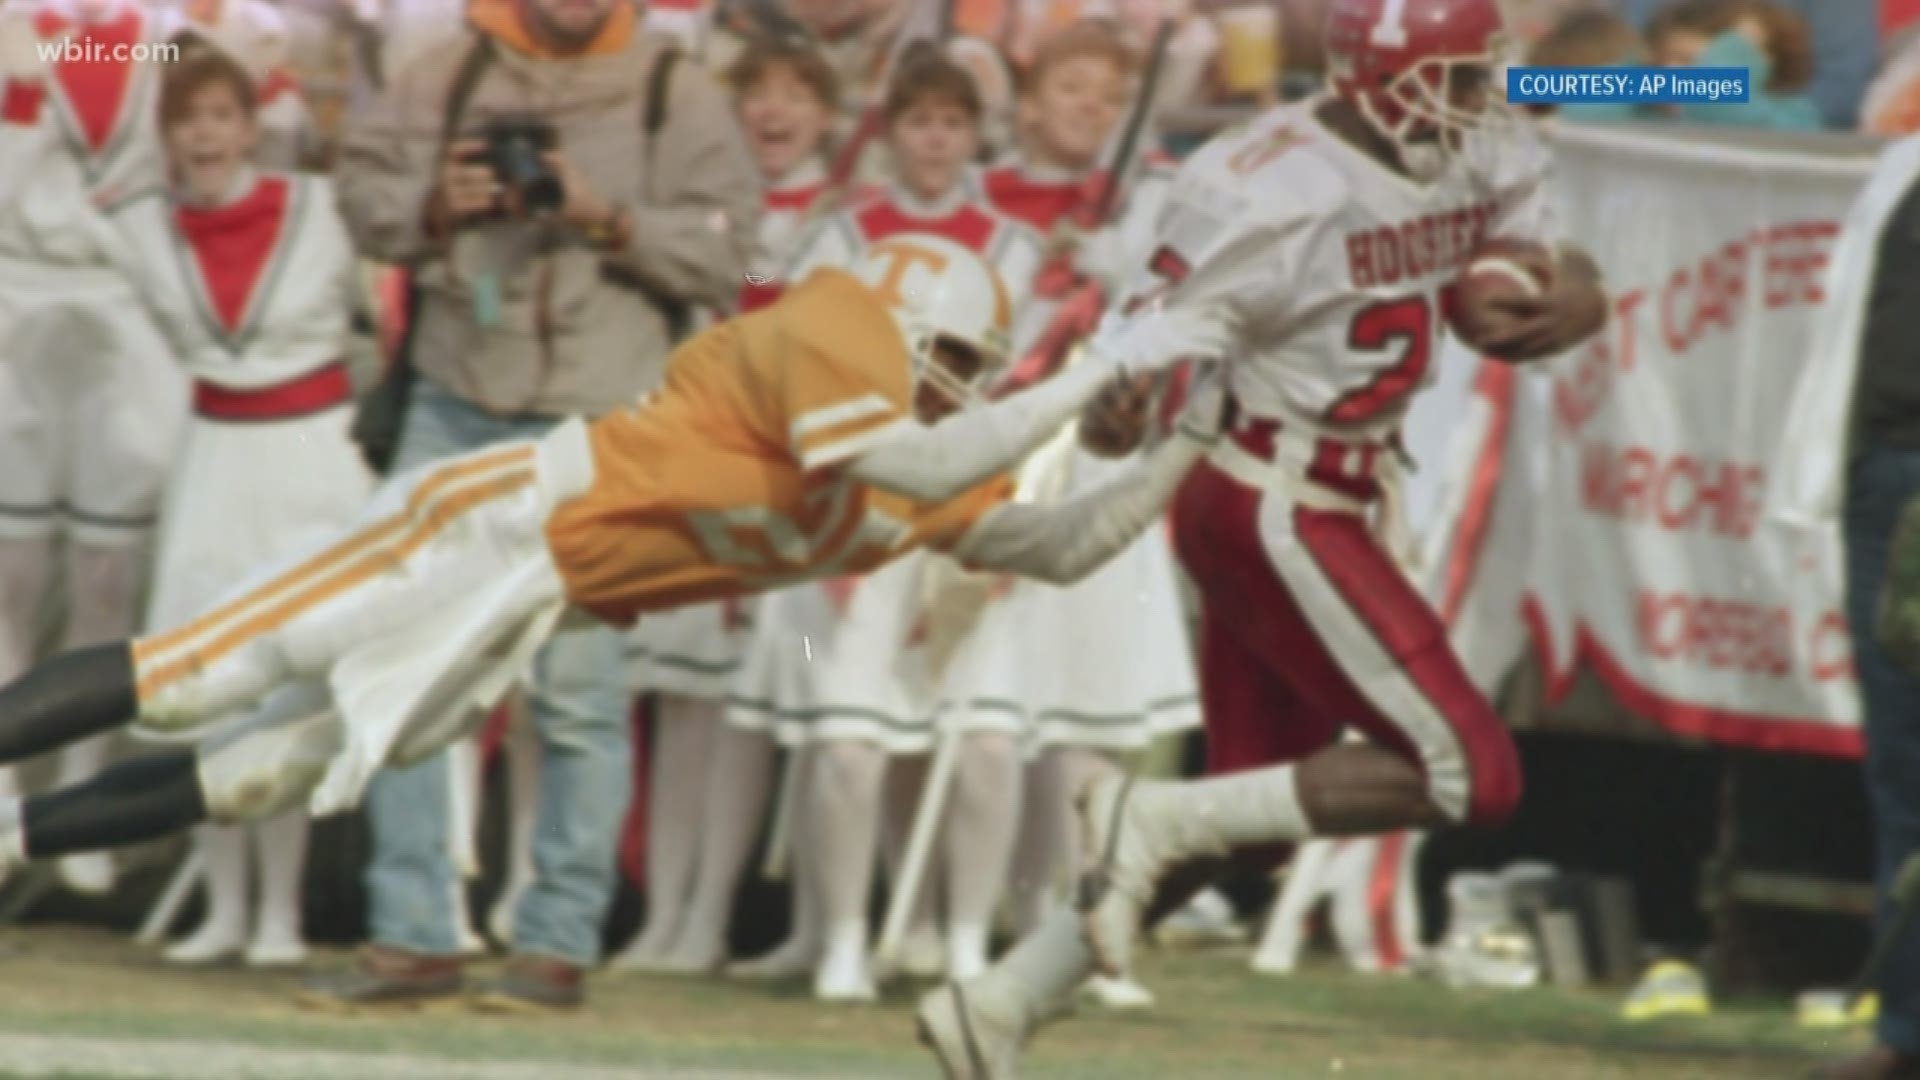 The Vols and the Hoosiers have only faced off once before.